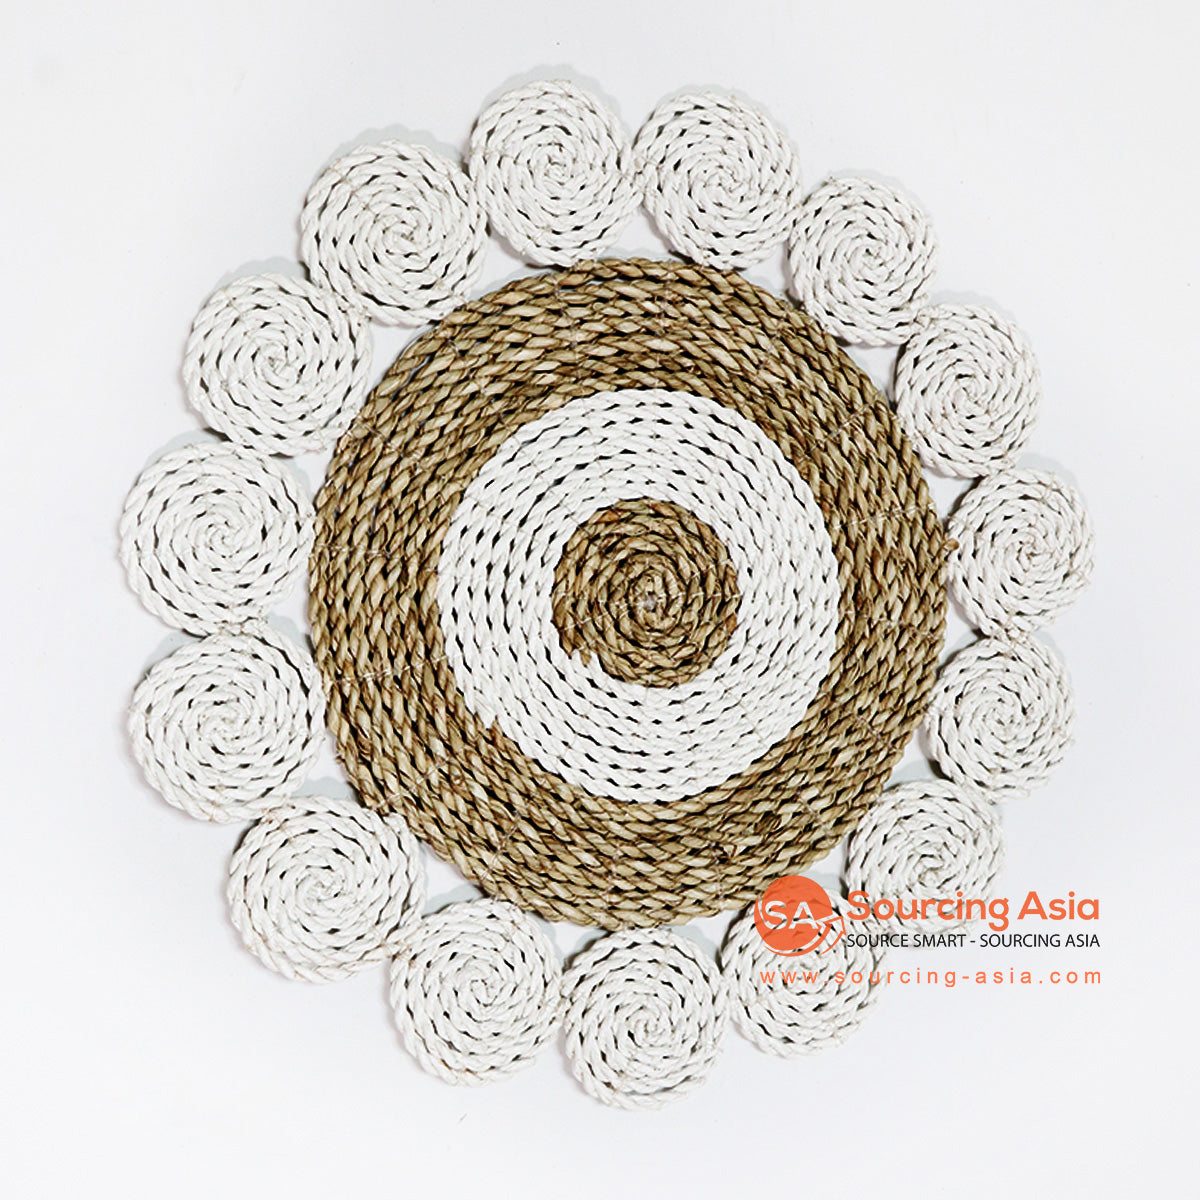 HBSC013-3 NATURAL AND WHITE MENDONG DECORATIVE PLACEMAT